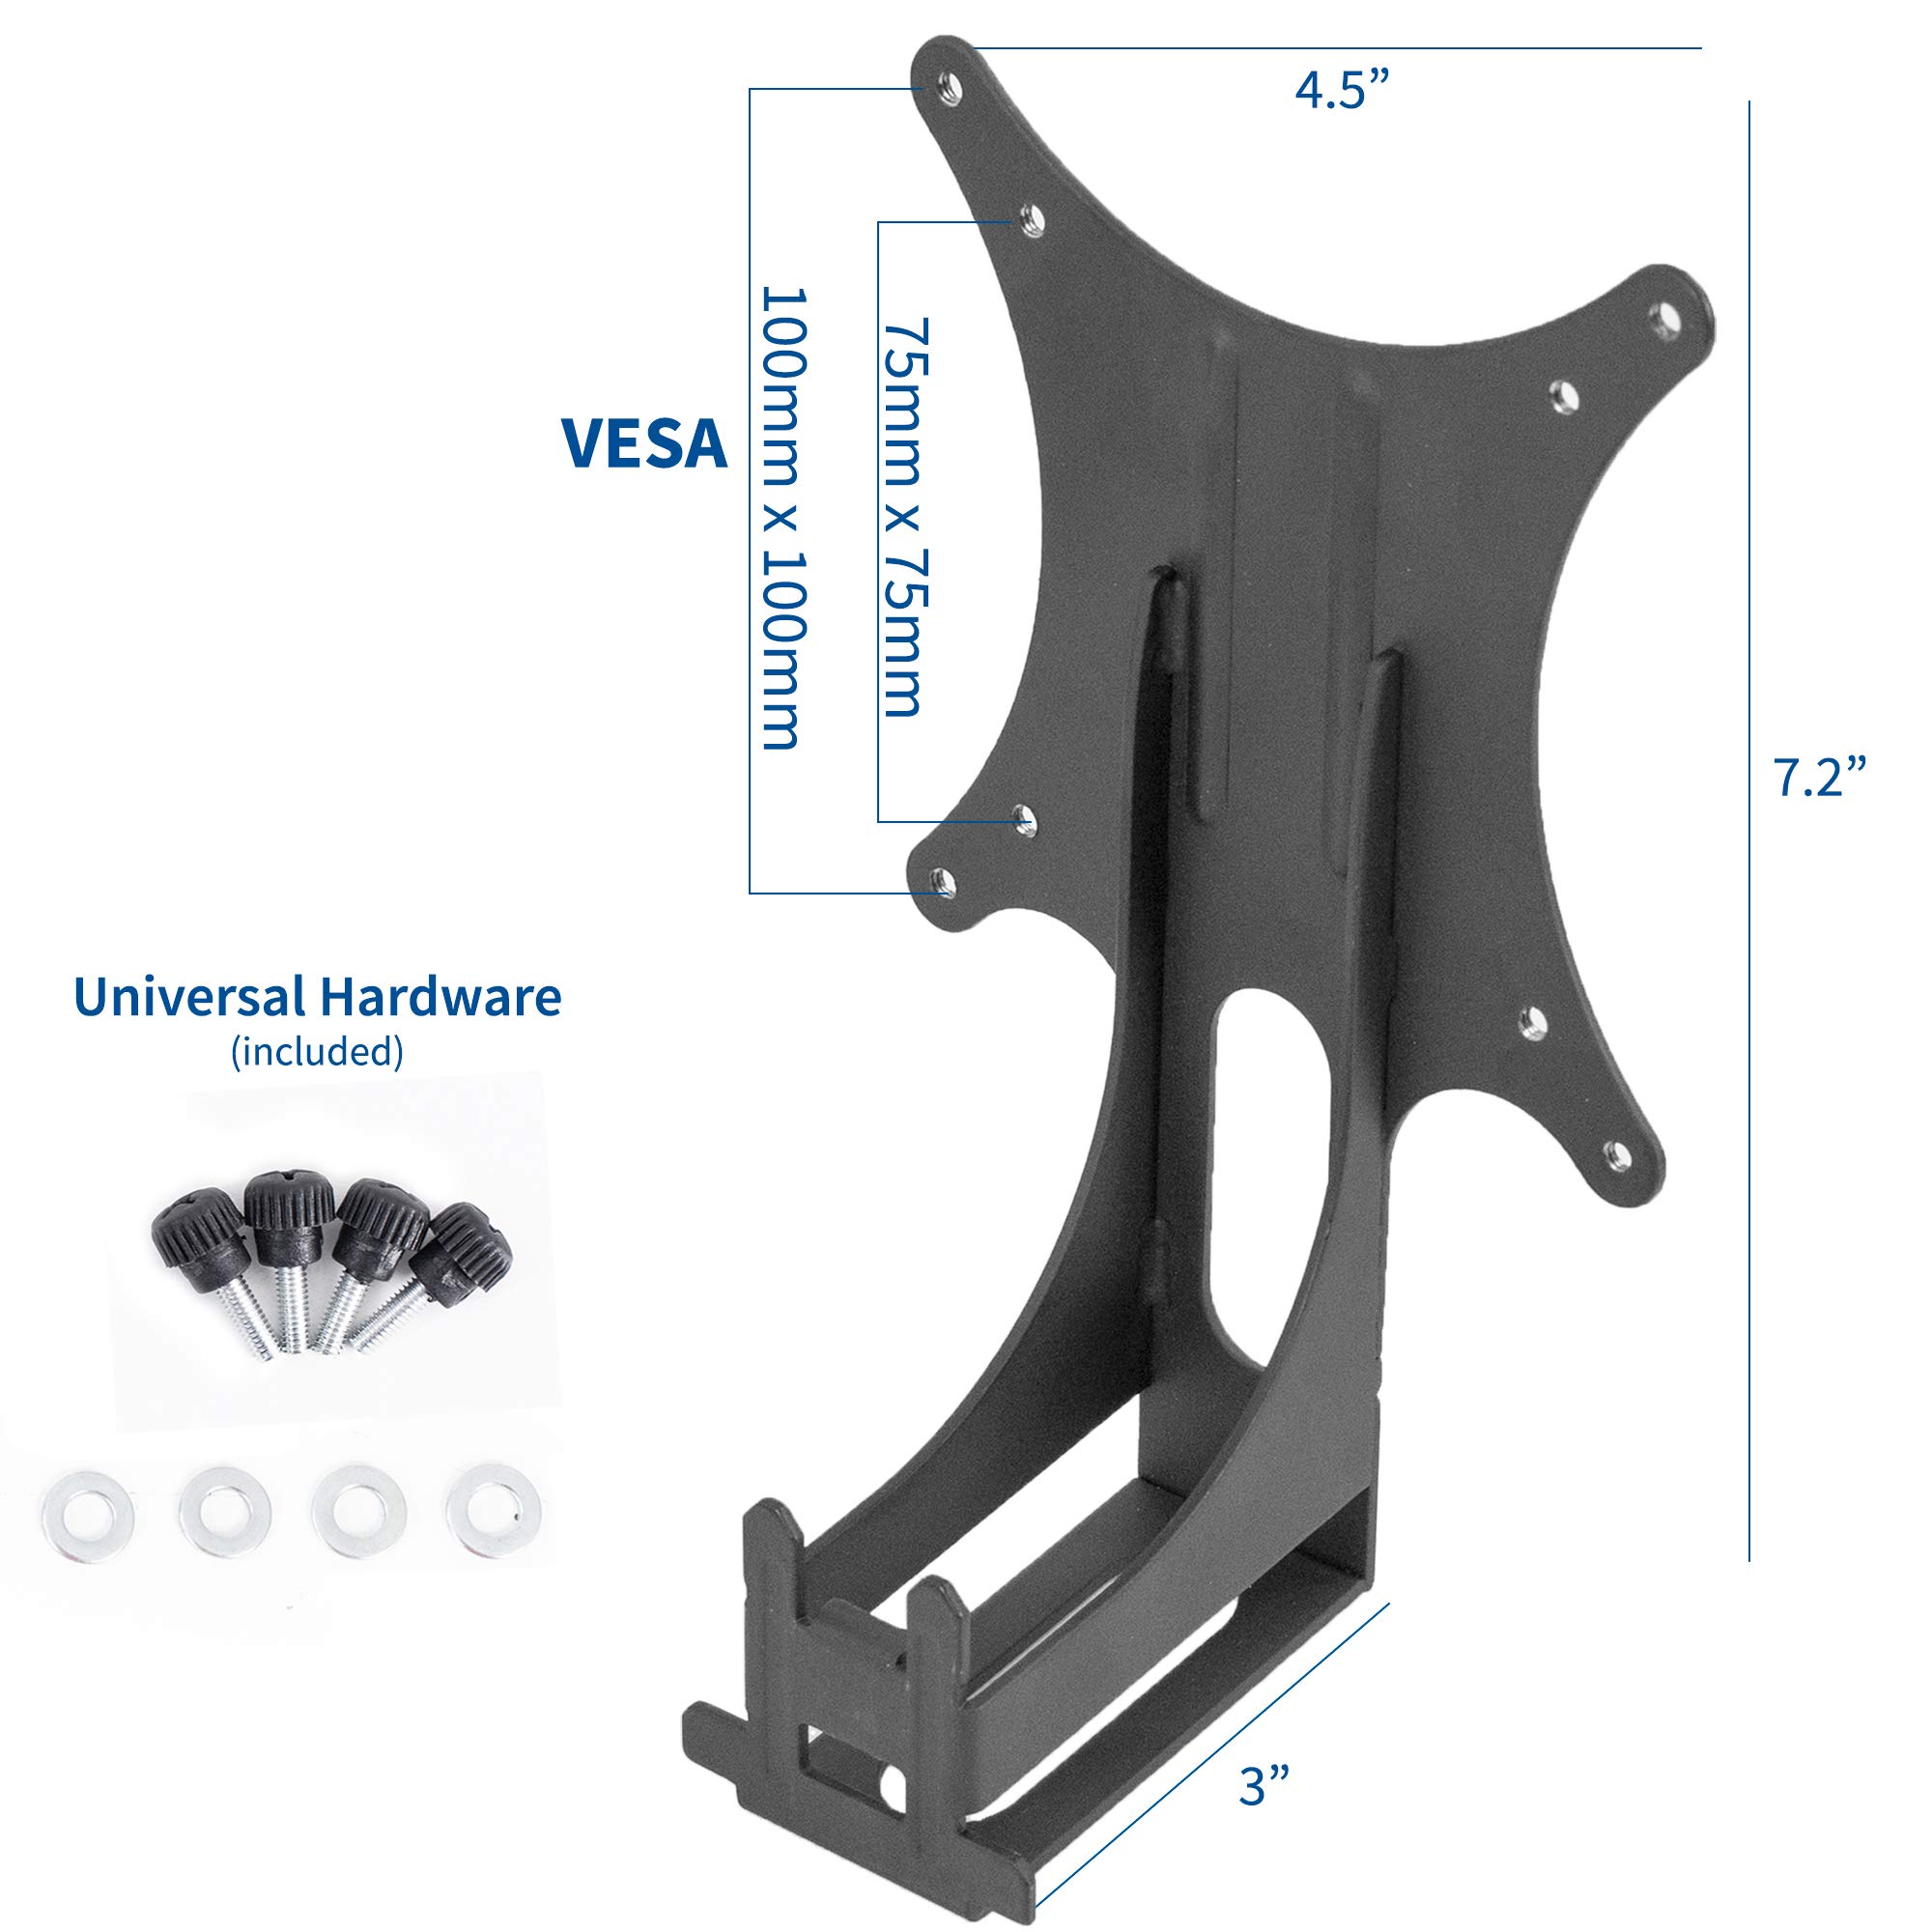 VIVO Quick Attach VESA Adapter Plate, Designed for Acer and Viewsonic Monitors Including R240HY bidx, SB220Q, RT240Y, R221Q, RT270, G227HQL, VX2276-smhd, and More, VESA up to 100x100, MOUNT-AR240H